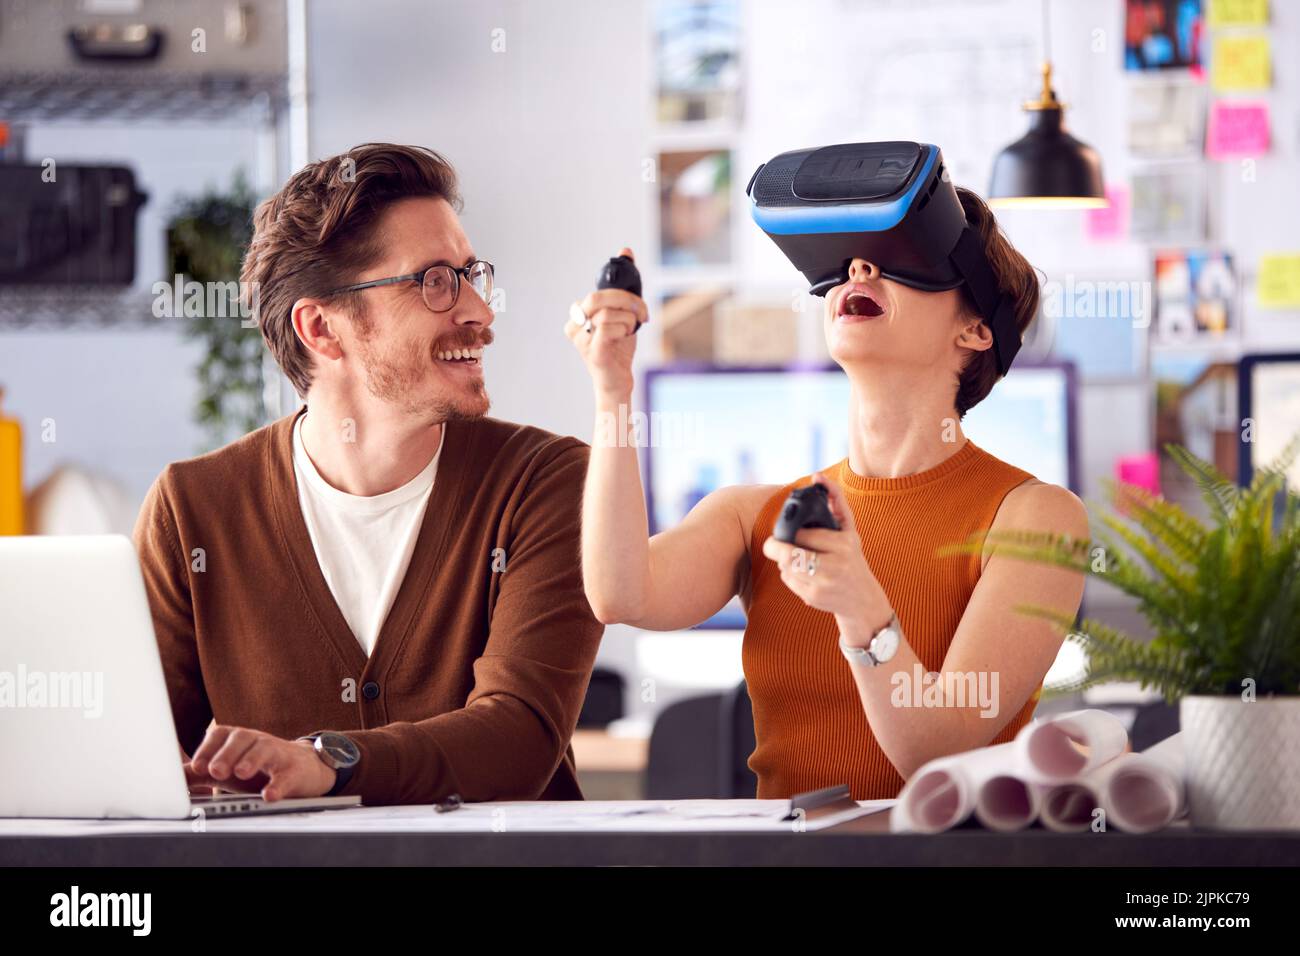 virtual reality, team, workplace, architects, vr, vr-brille, metaverse, computer-simulated reality, immersive multimedia, virtual reality simulators, Stock Photo